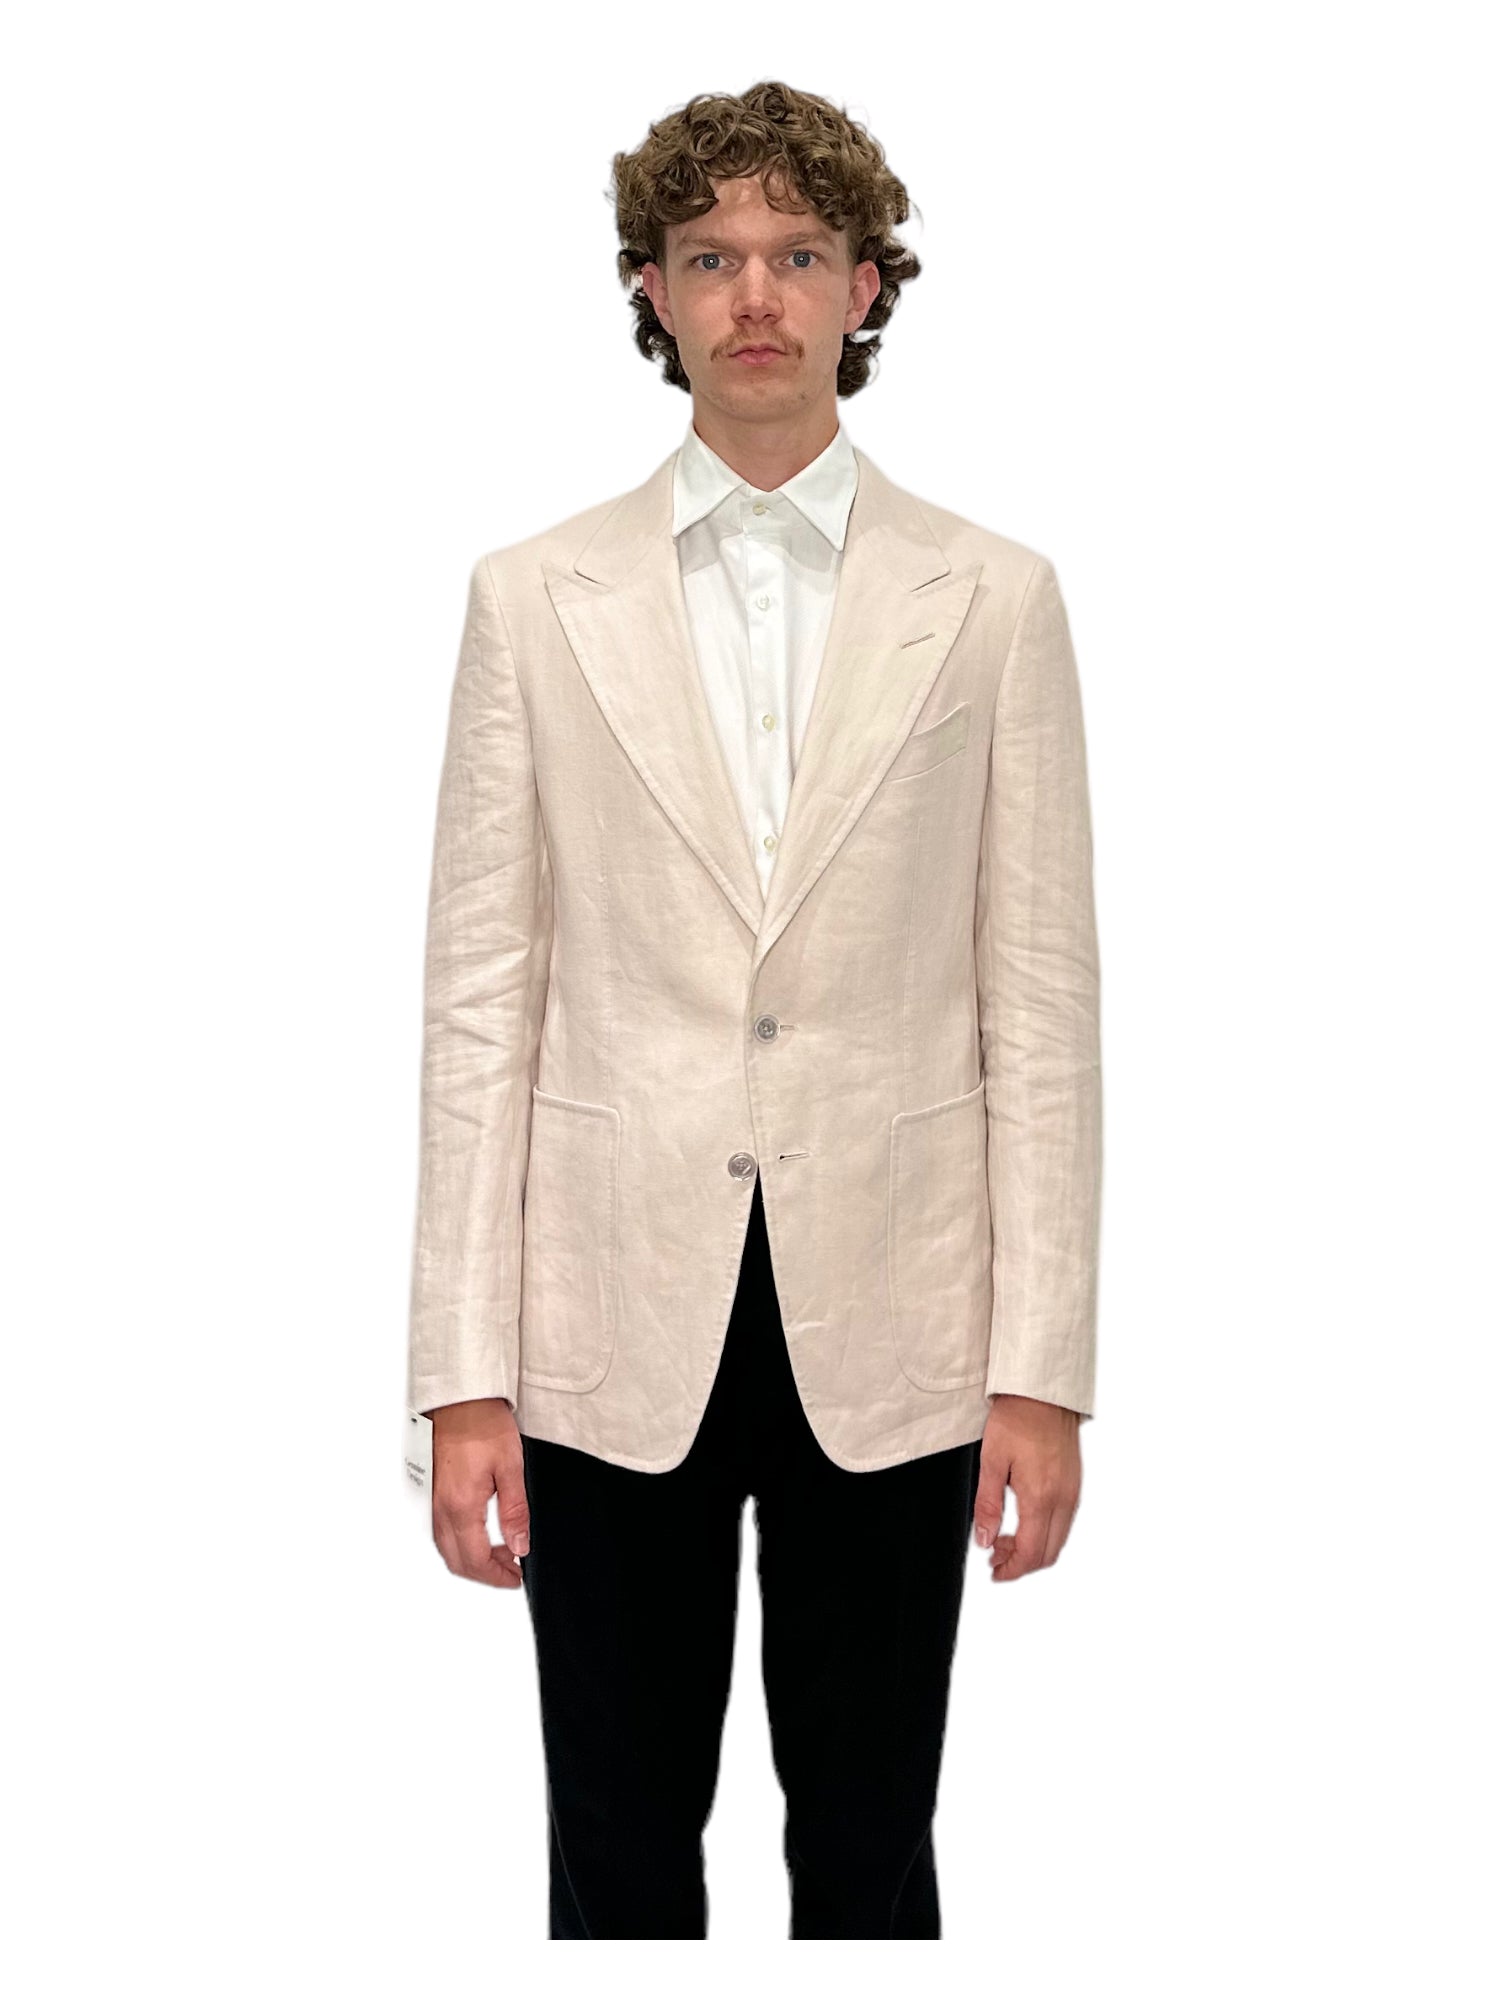 Tom Ford Cream Linen Blazer 38R - Genuine Design Luxury Consignment for Men. New & Pre-Owned Clothing, Shoes, & Accessories. Calgary, Canada